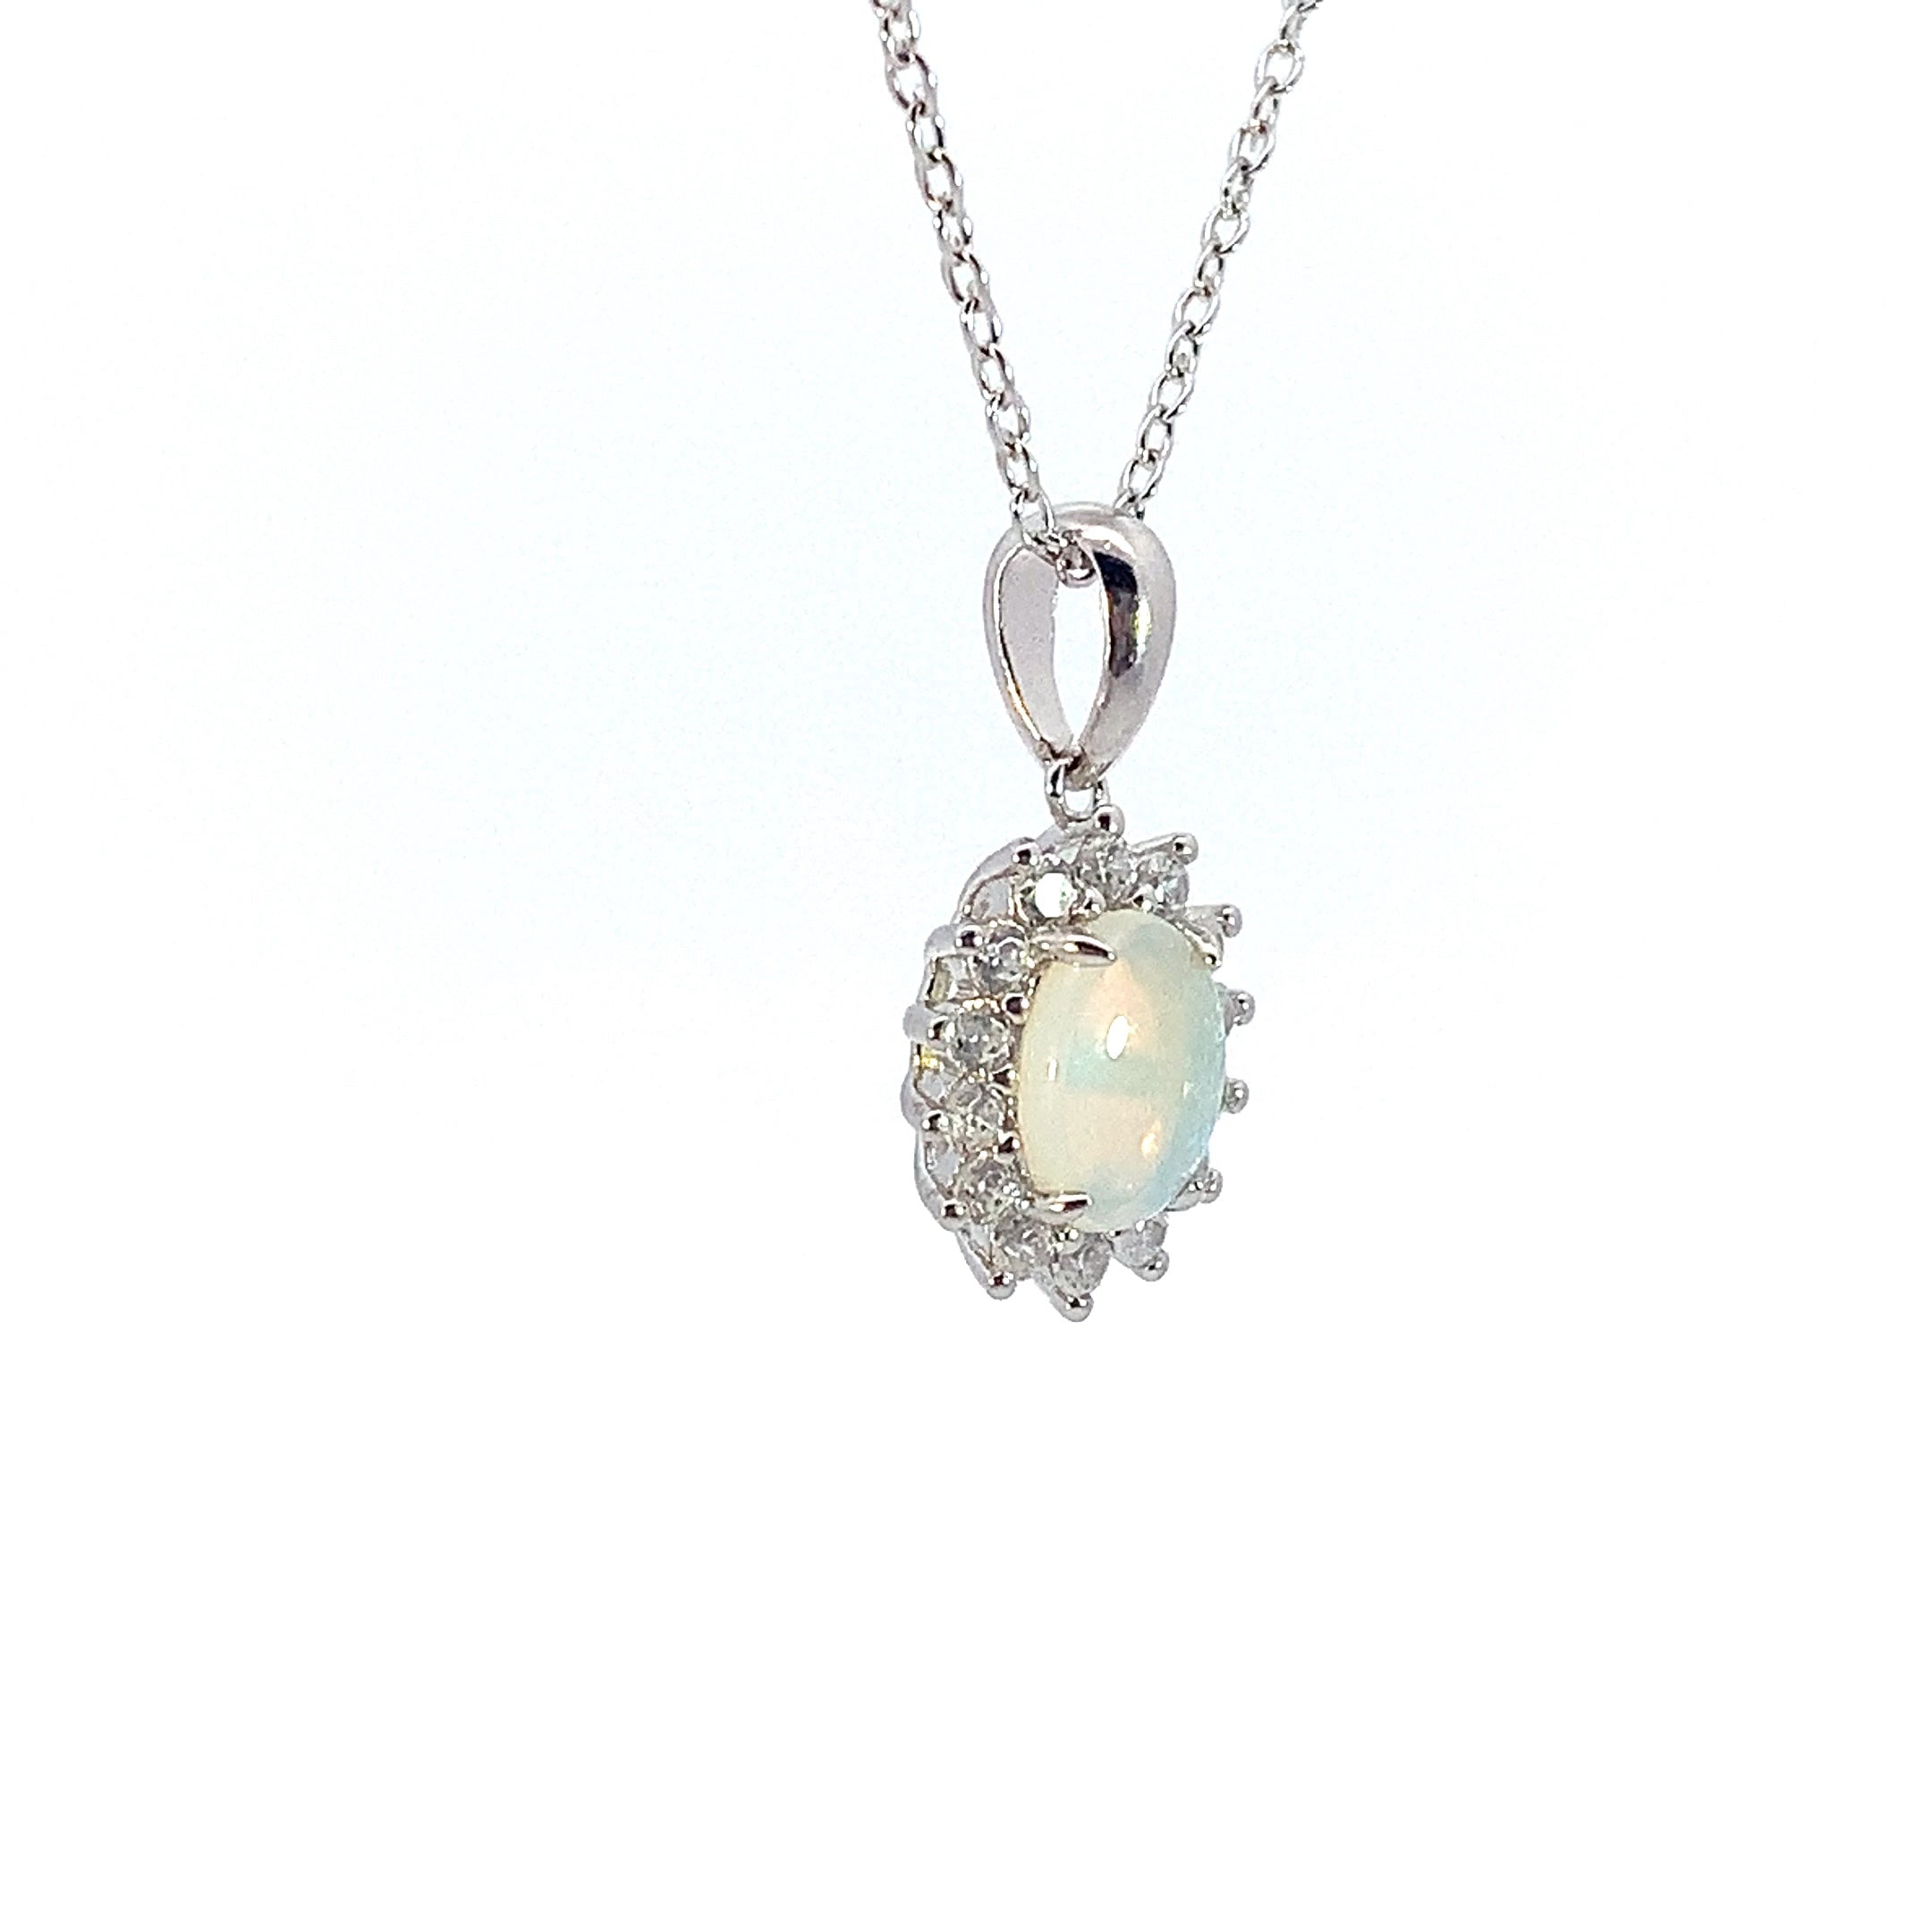 Sterling Silver White Opal pendant Necklace in cluster setting with opal 7x5mm - Masterpiece Jewellery Opal & Gems Sydney Australia | Online Shop